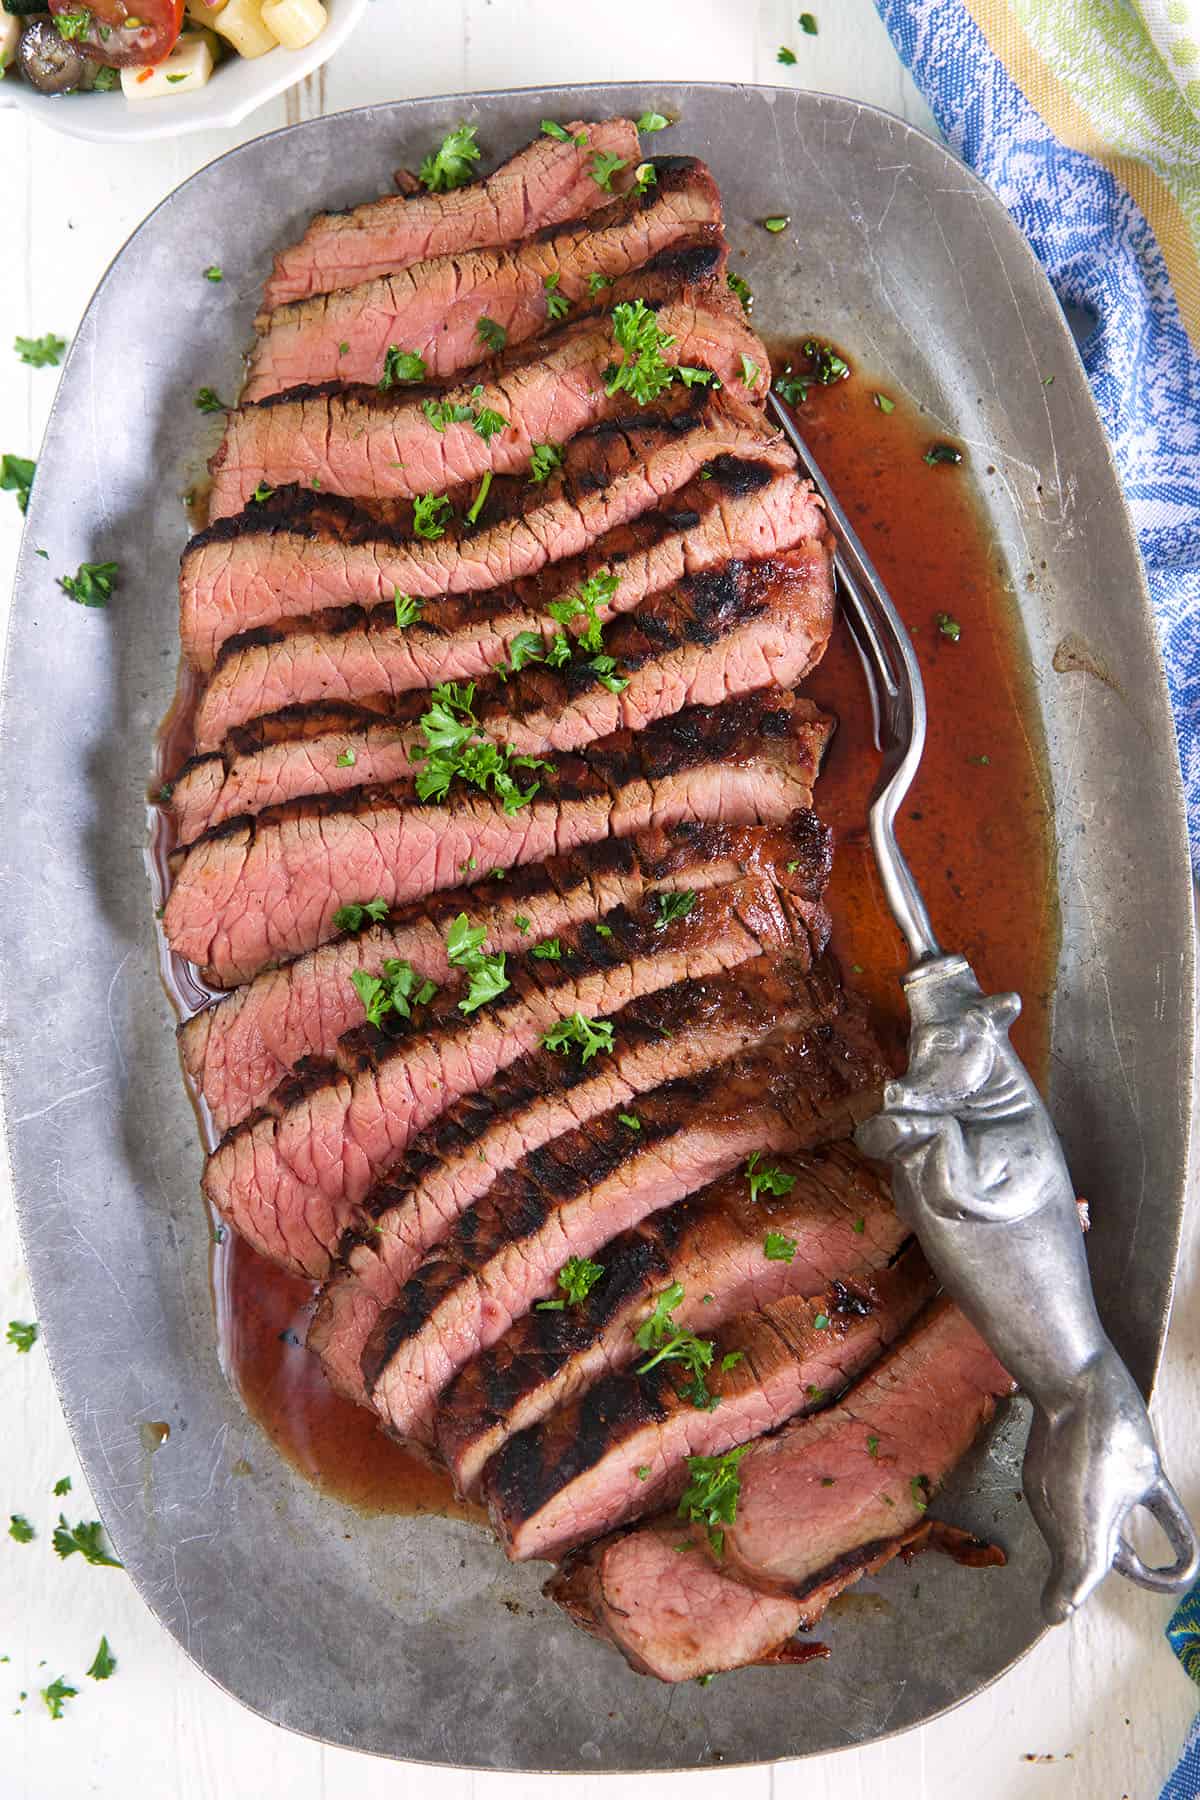 Sliced red meat is presented on a silver platter. 